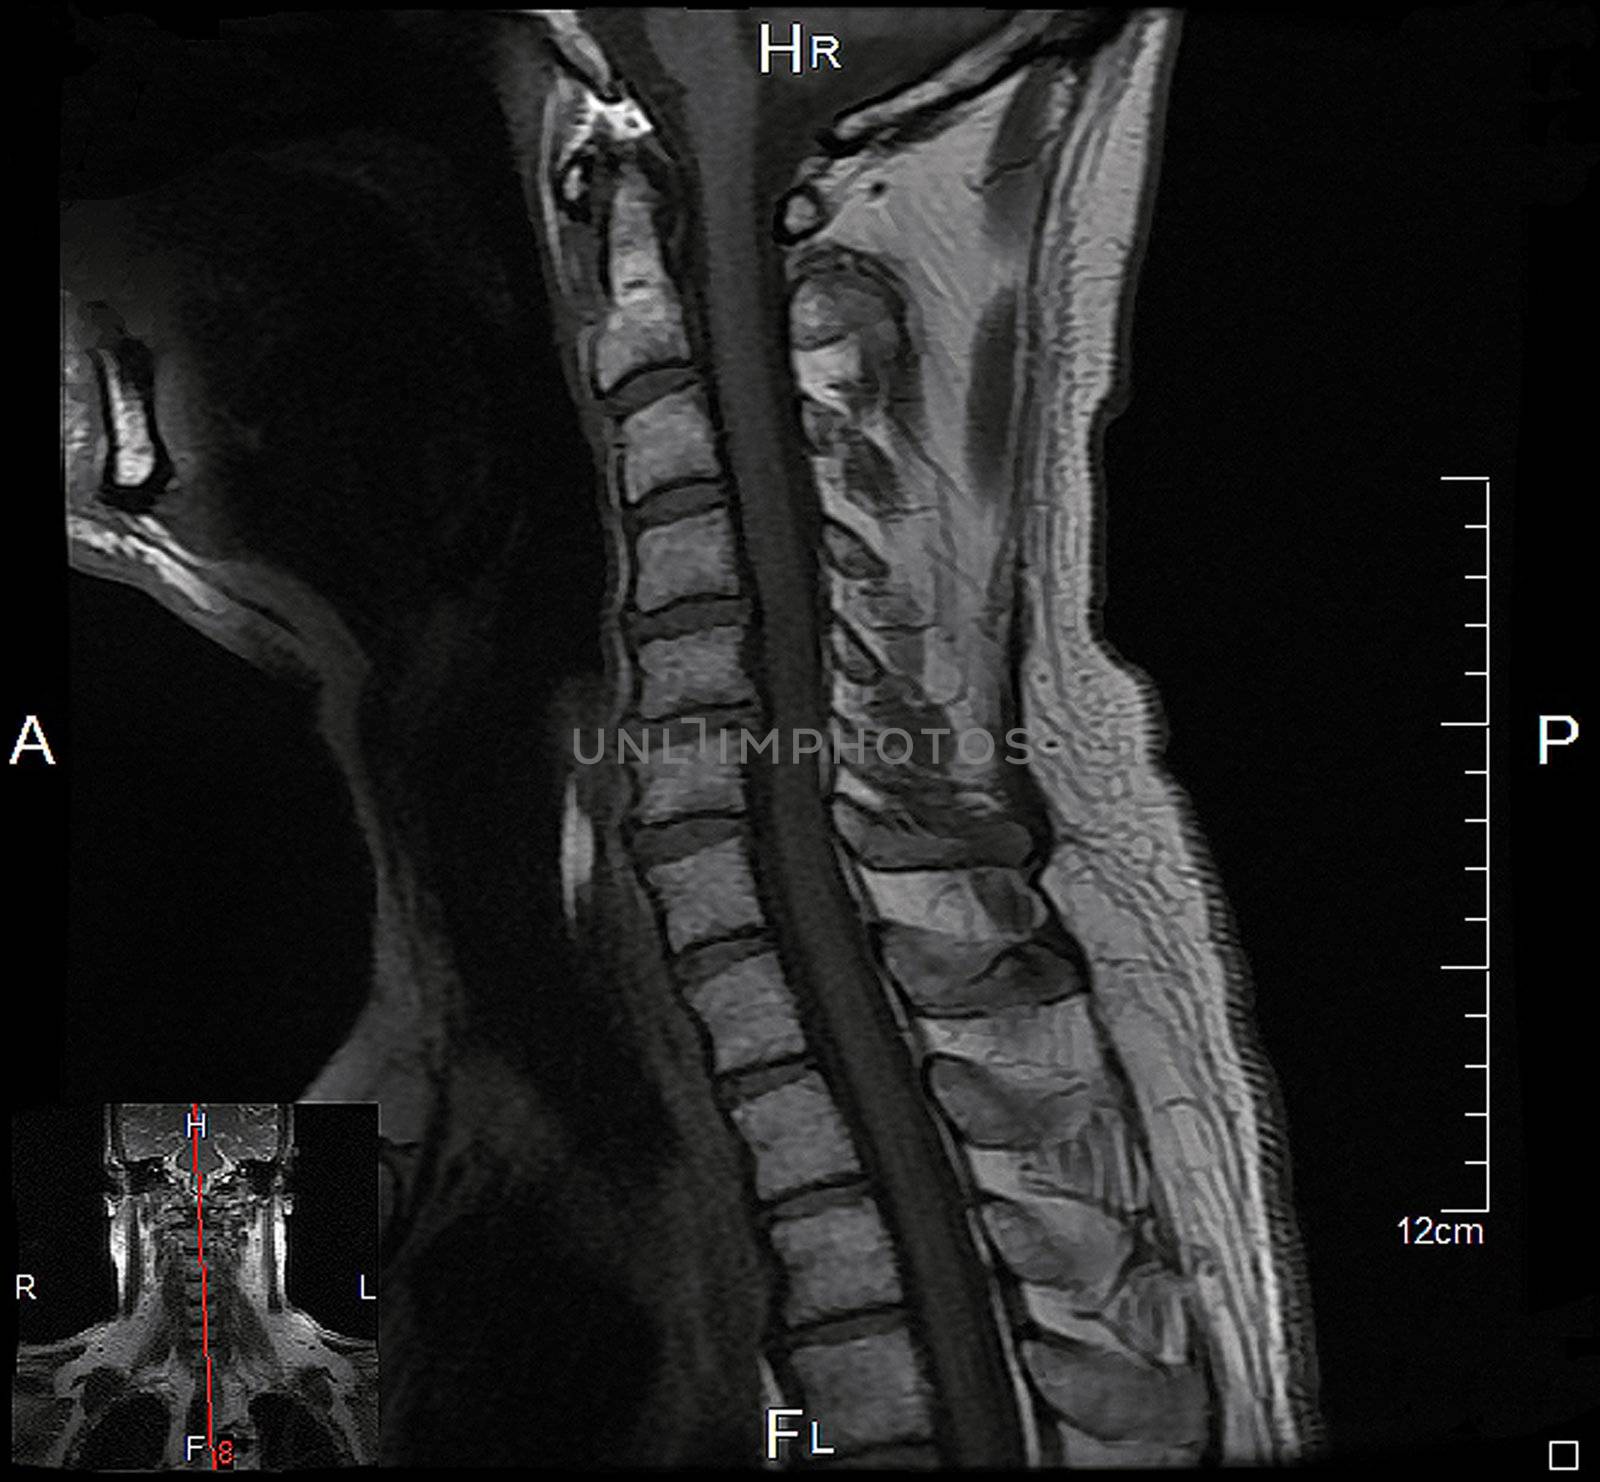 a magnetic resonance imaging of the cervical spine of a human